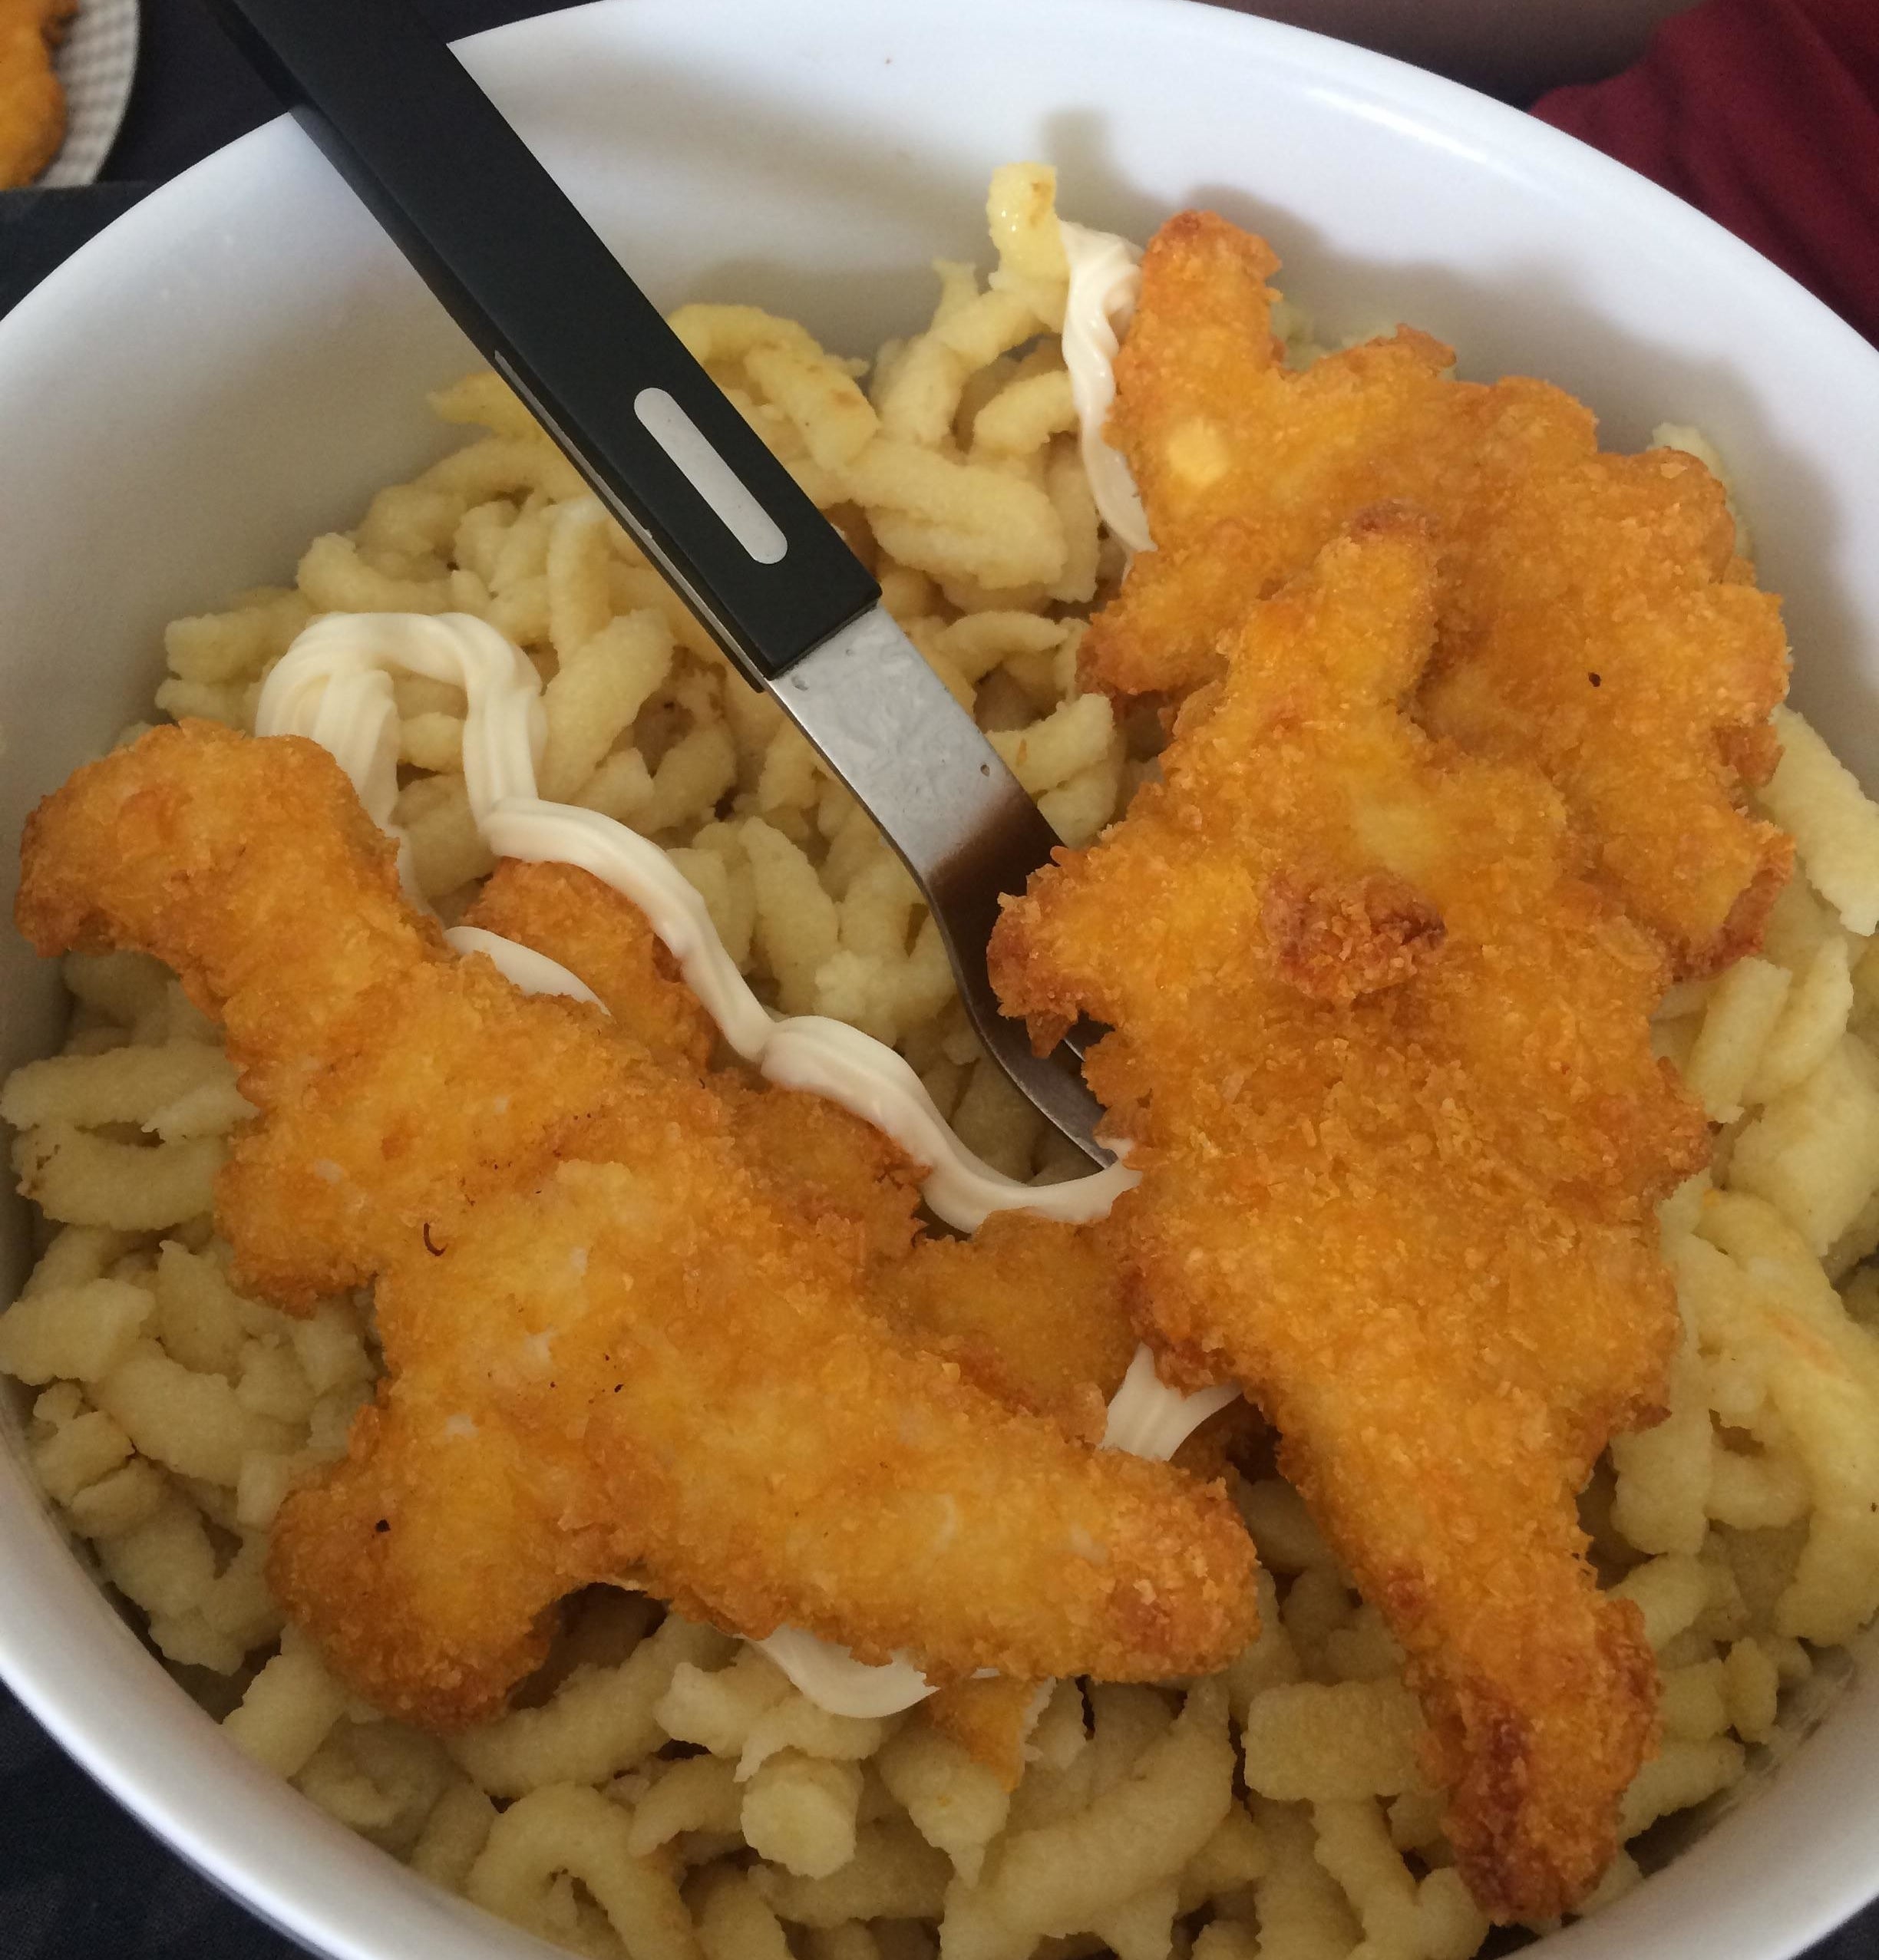 A bowl with noodles, 3 dino nuggets, and mayo drizzled on top